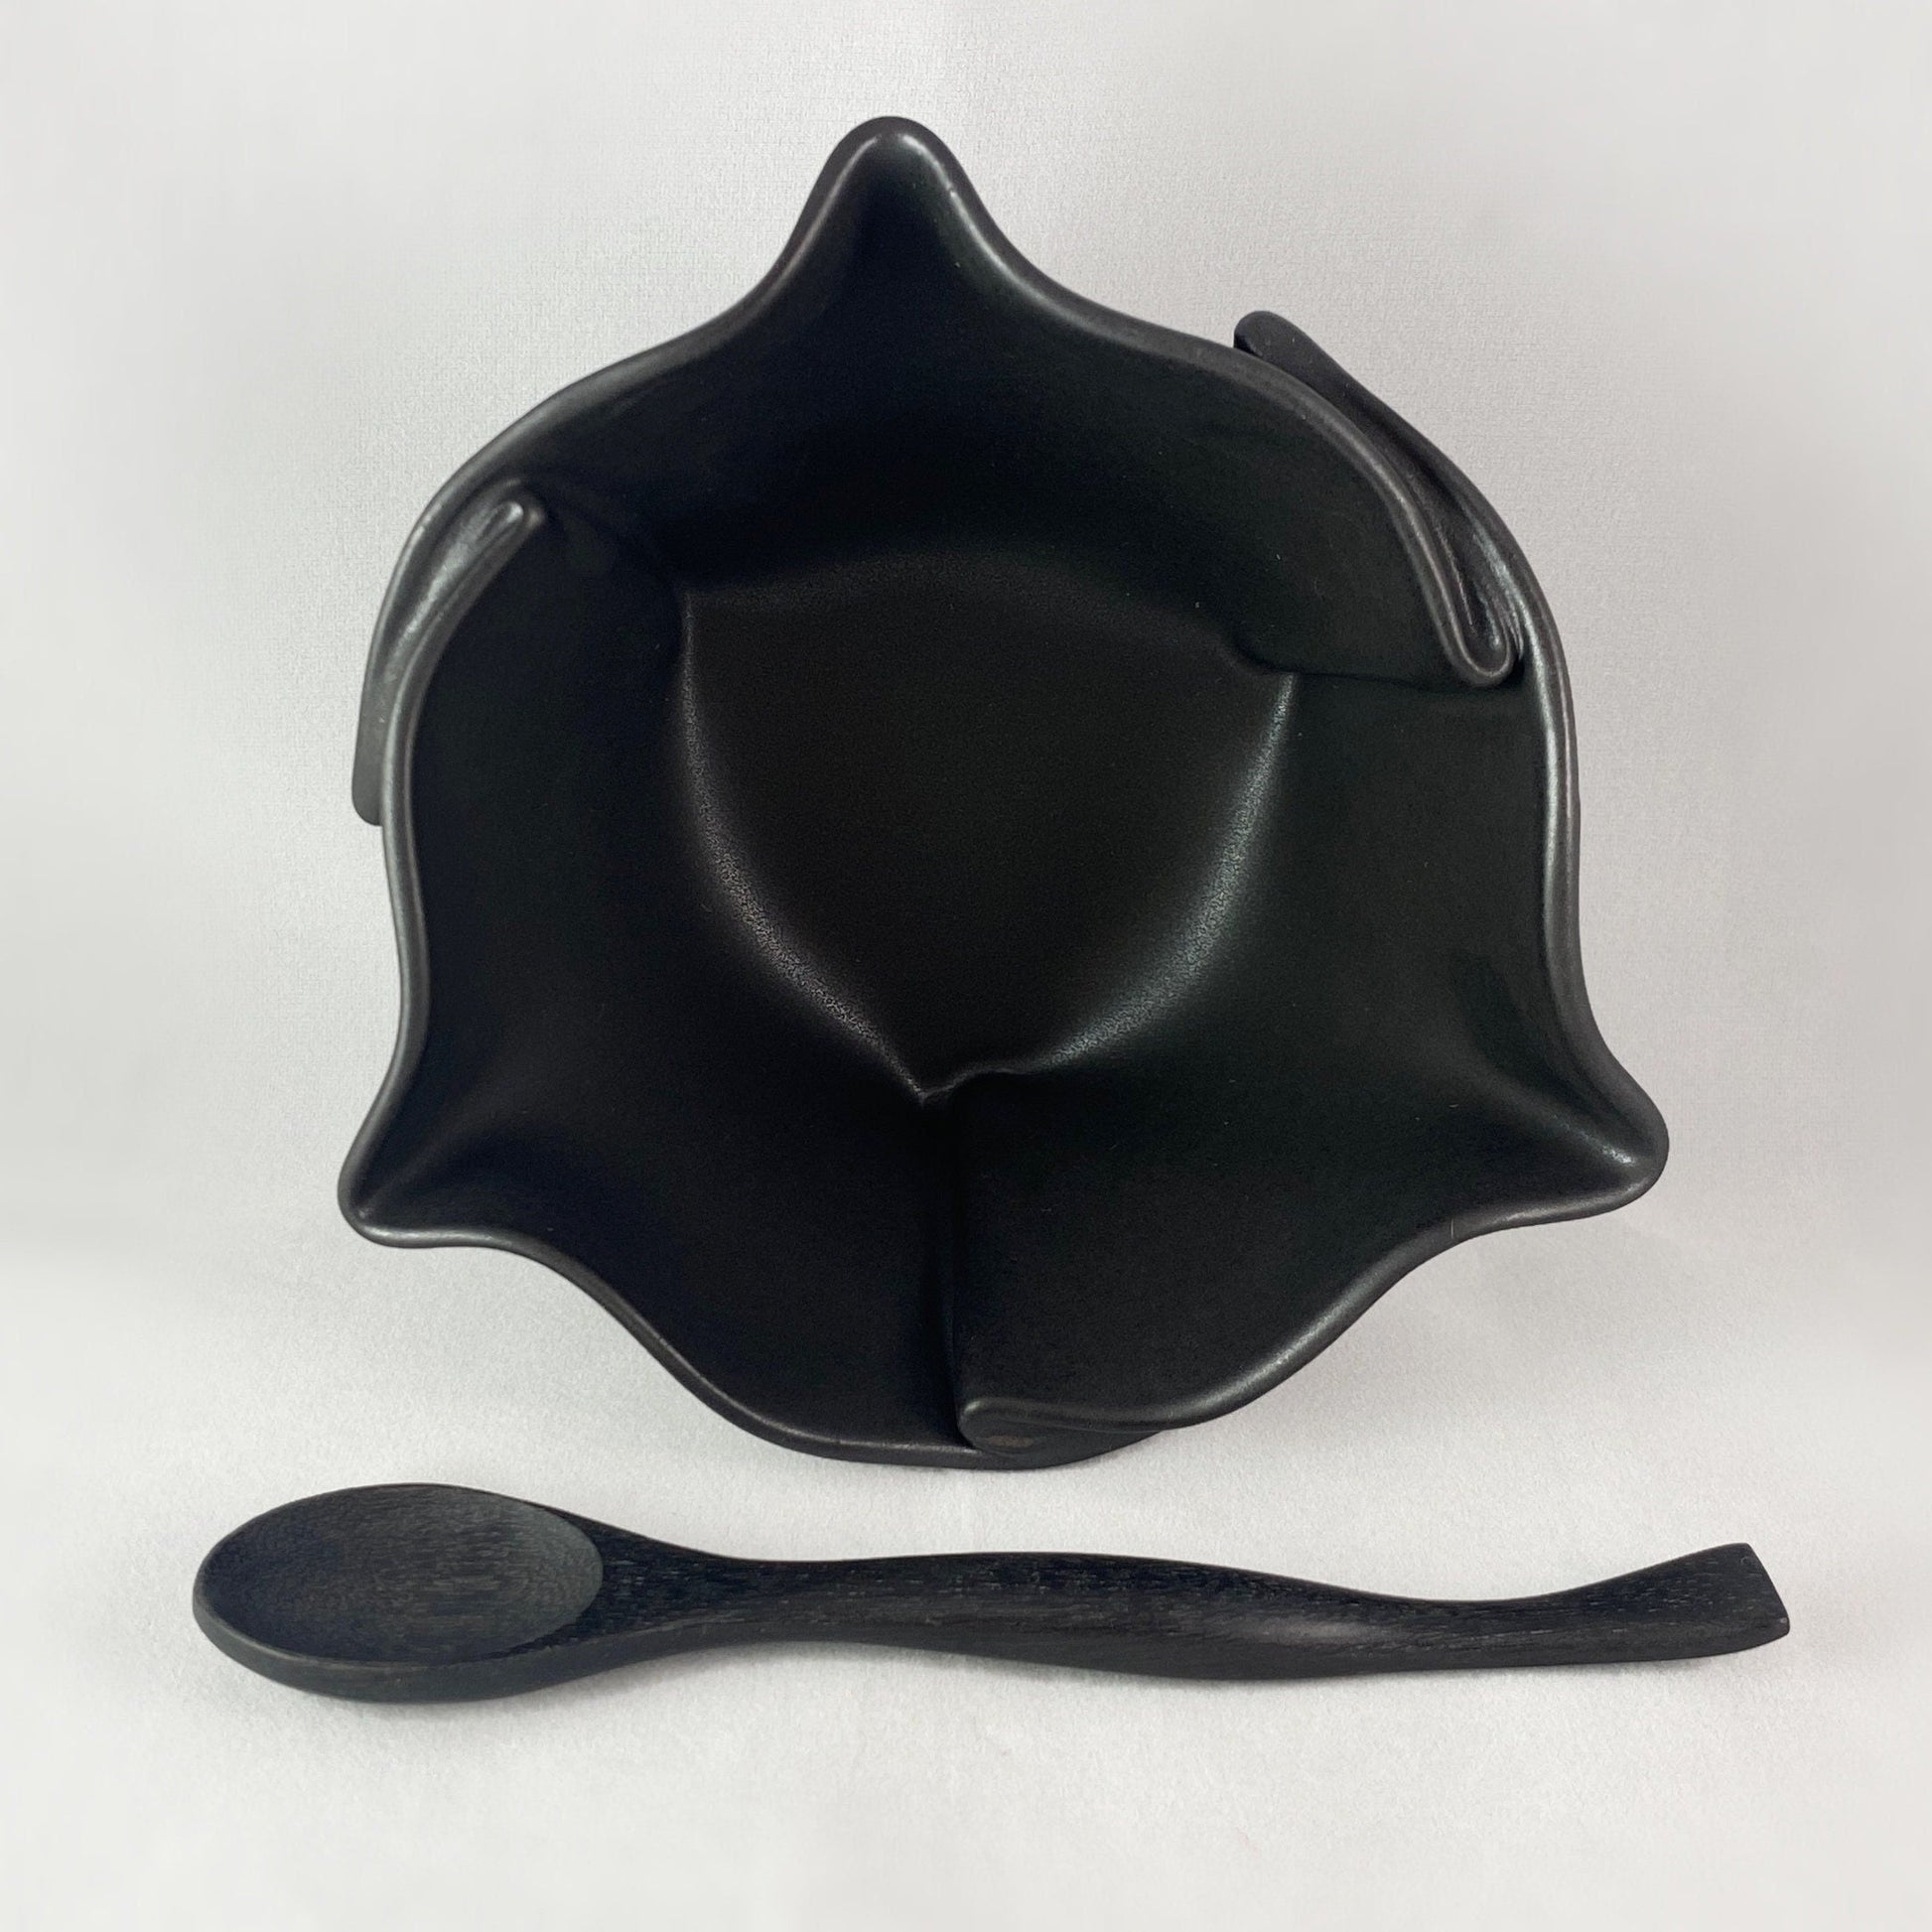 Small Handmade Ebony Multi-purpose Dish with Serving Spoon, Functional and Decorative Pottery